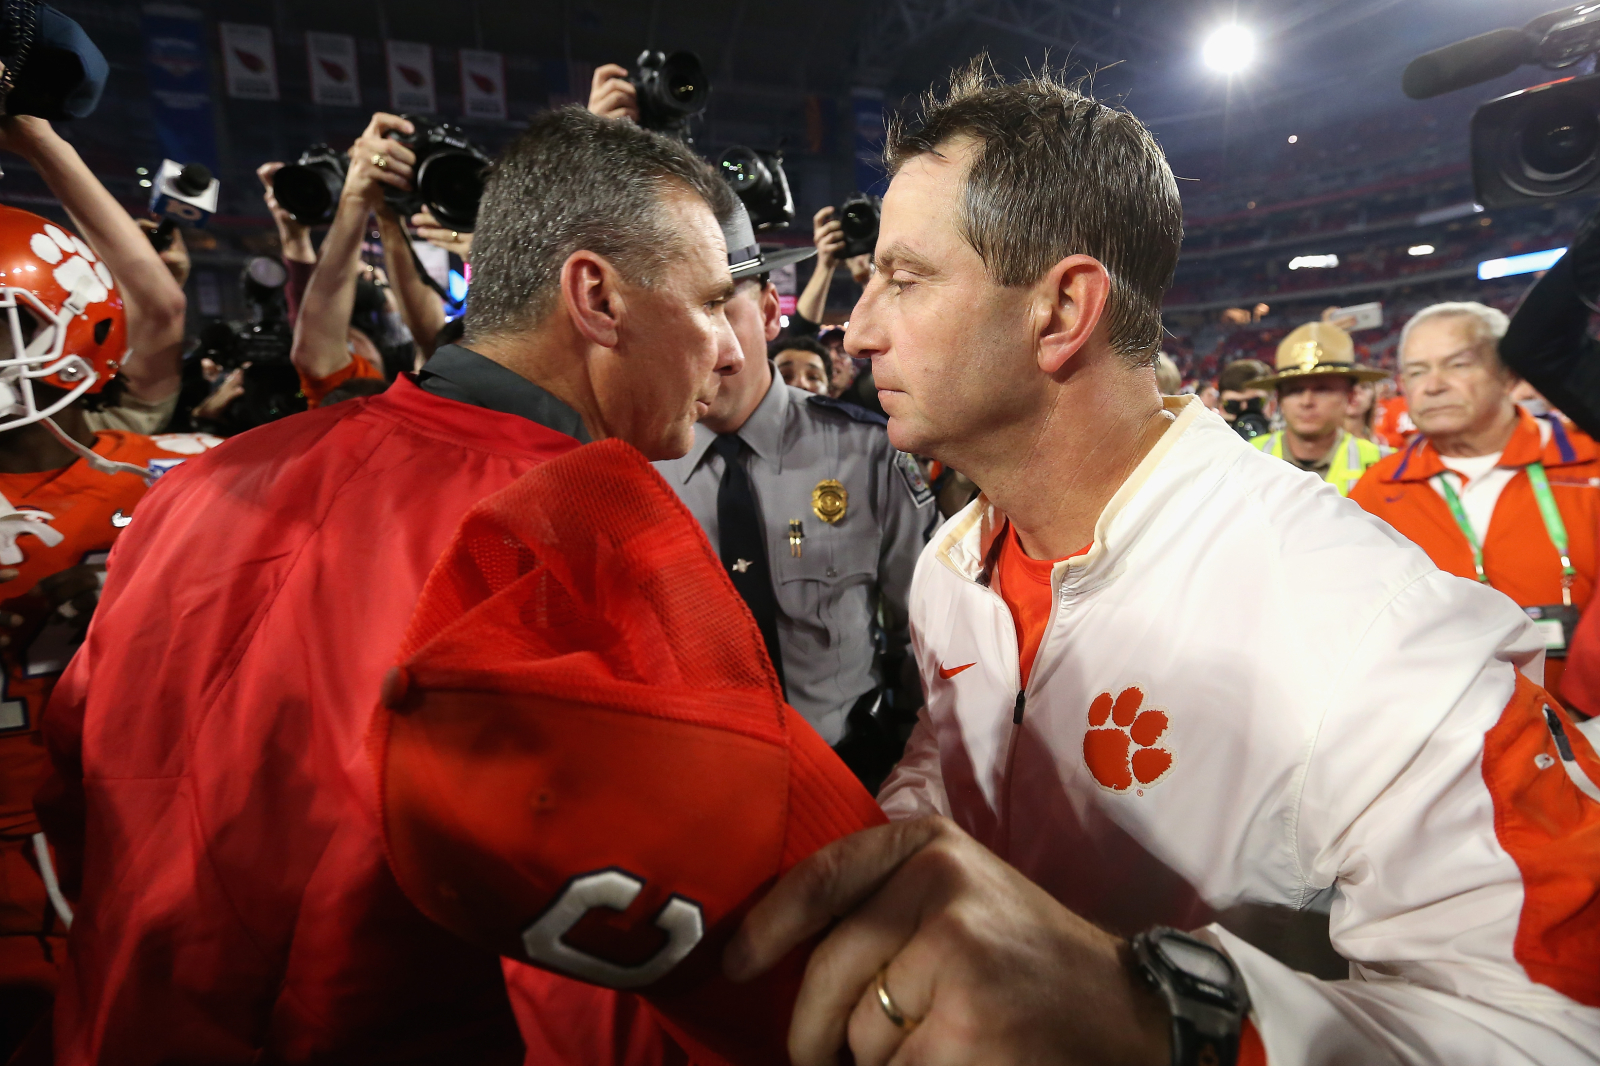 Dabo Swinney recently said he doesn't think Ohio State should make the College Football Playoff. Urban Meyer had something to say about that.